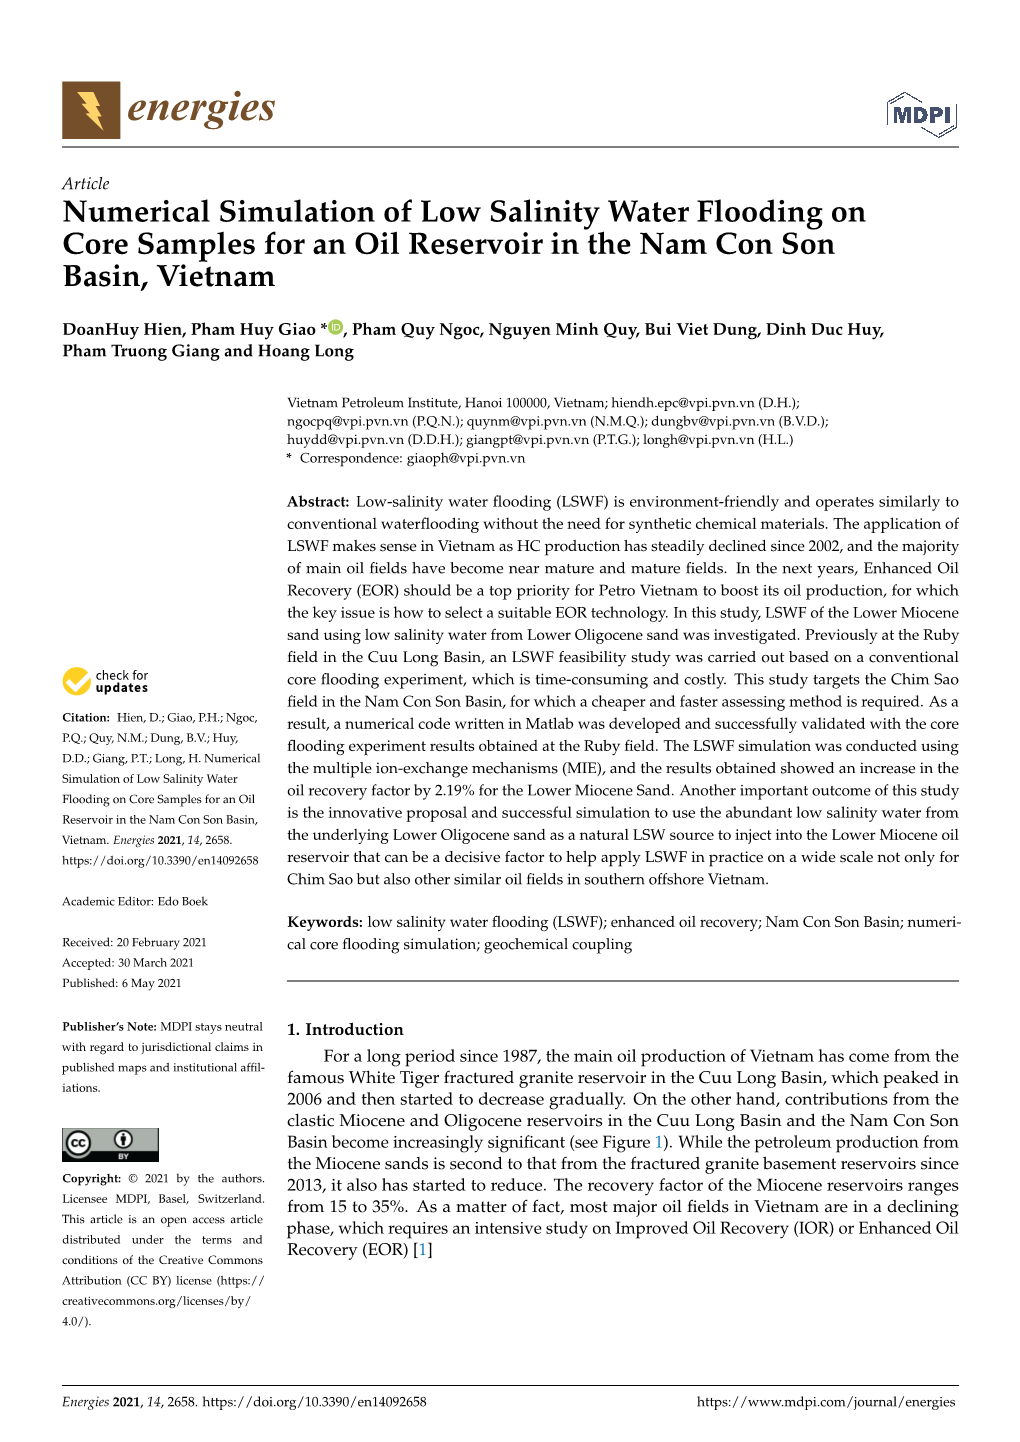 Numerical Simulation of Low Salinity Water Flooding on Core Samples for an Oil Reservoir in the Nam Con Son Basin, Vietnam